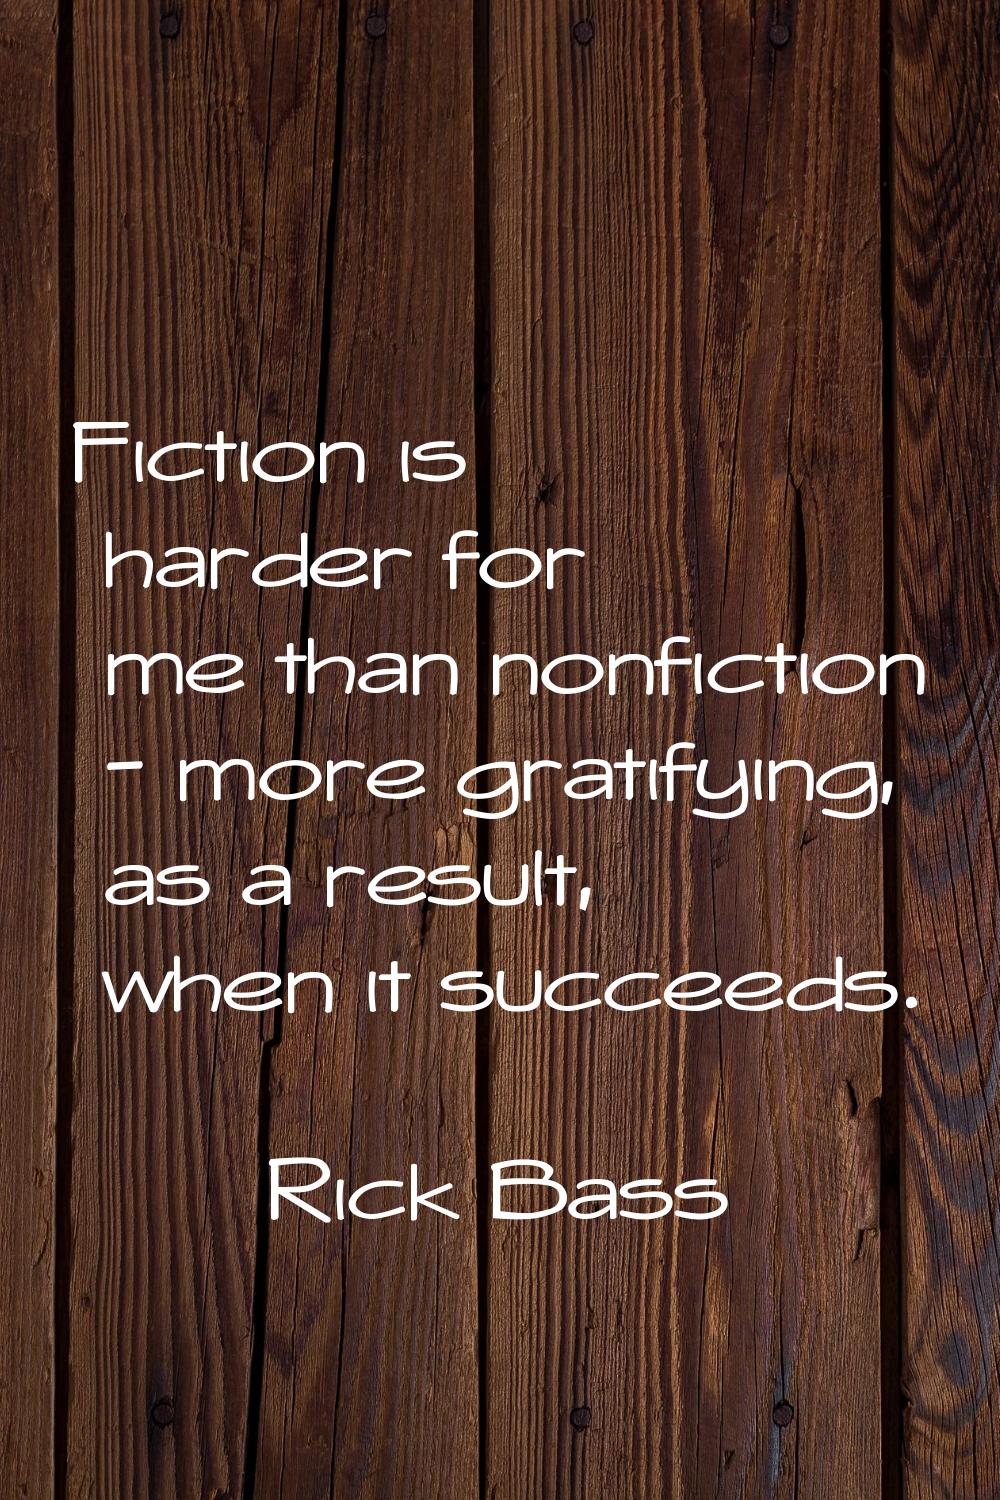 Fiction is harder for me than nonfiction - more gratifying, as a result, when it succeeds.